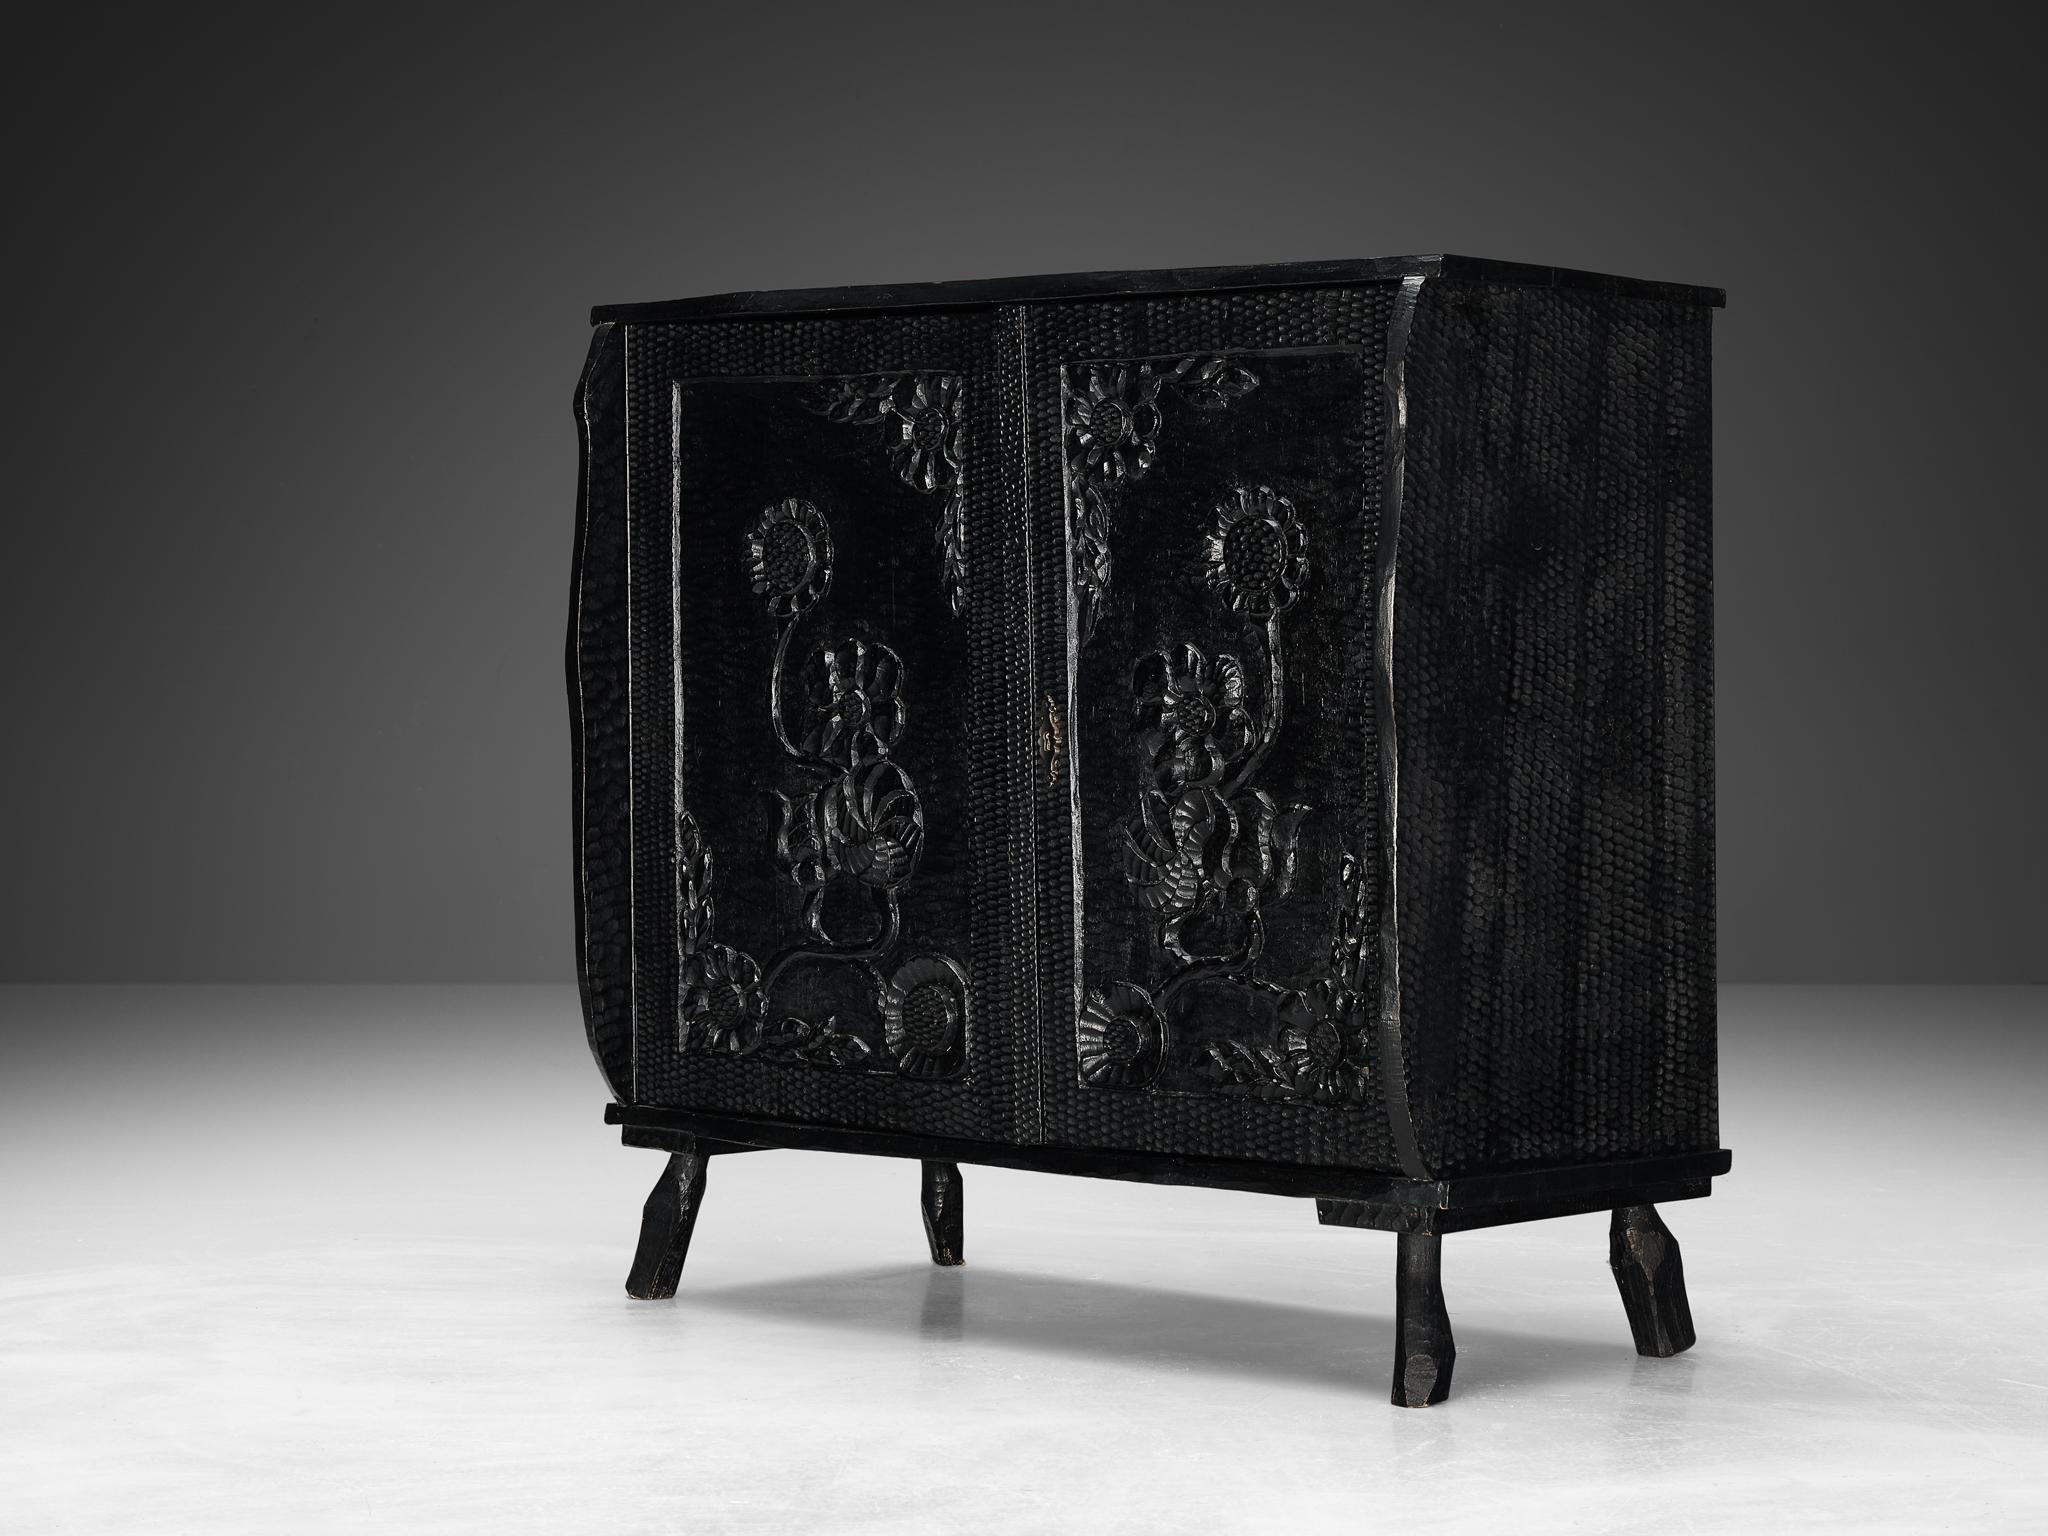 Sculptural Cabinet in Black Lacquered Wood with Decorative Carvings  For Sale 2